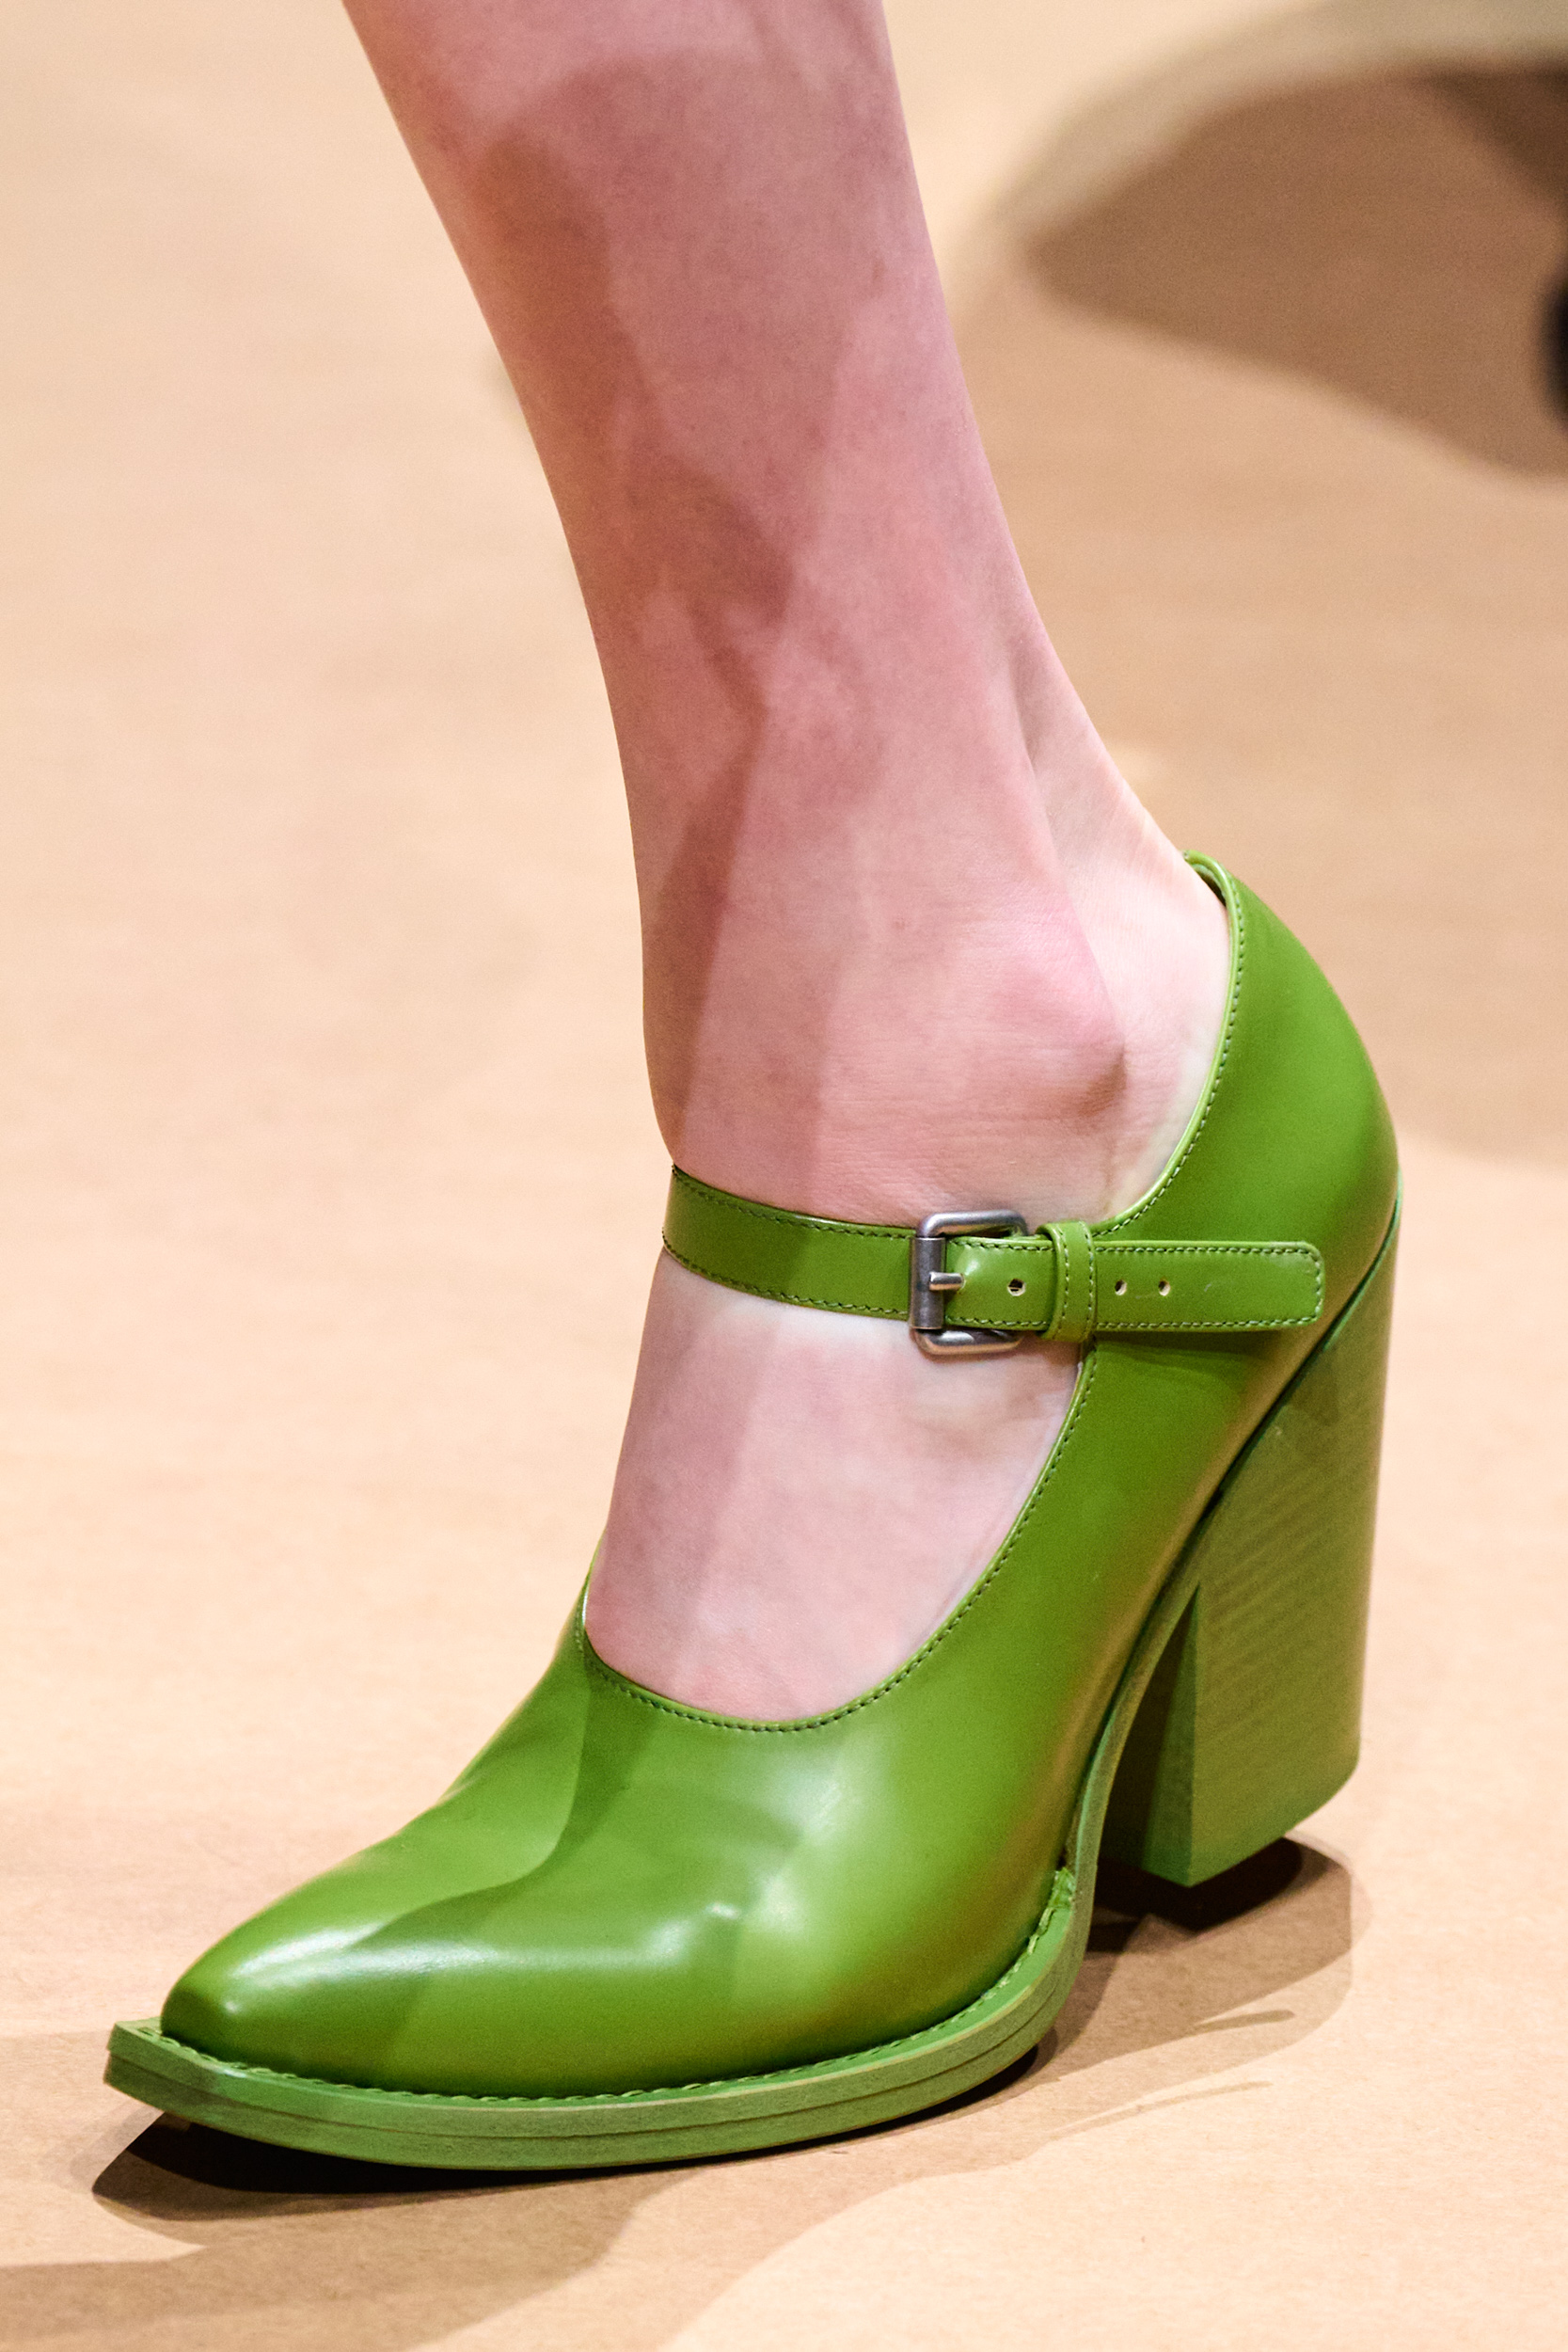 Pointed Toe Shoe Spring 2023 Fashion Trend The Impression